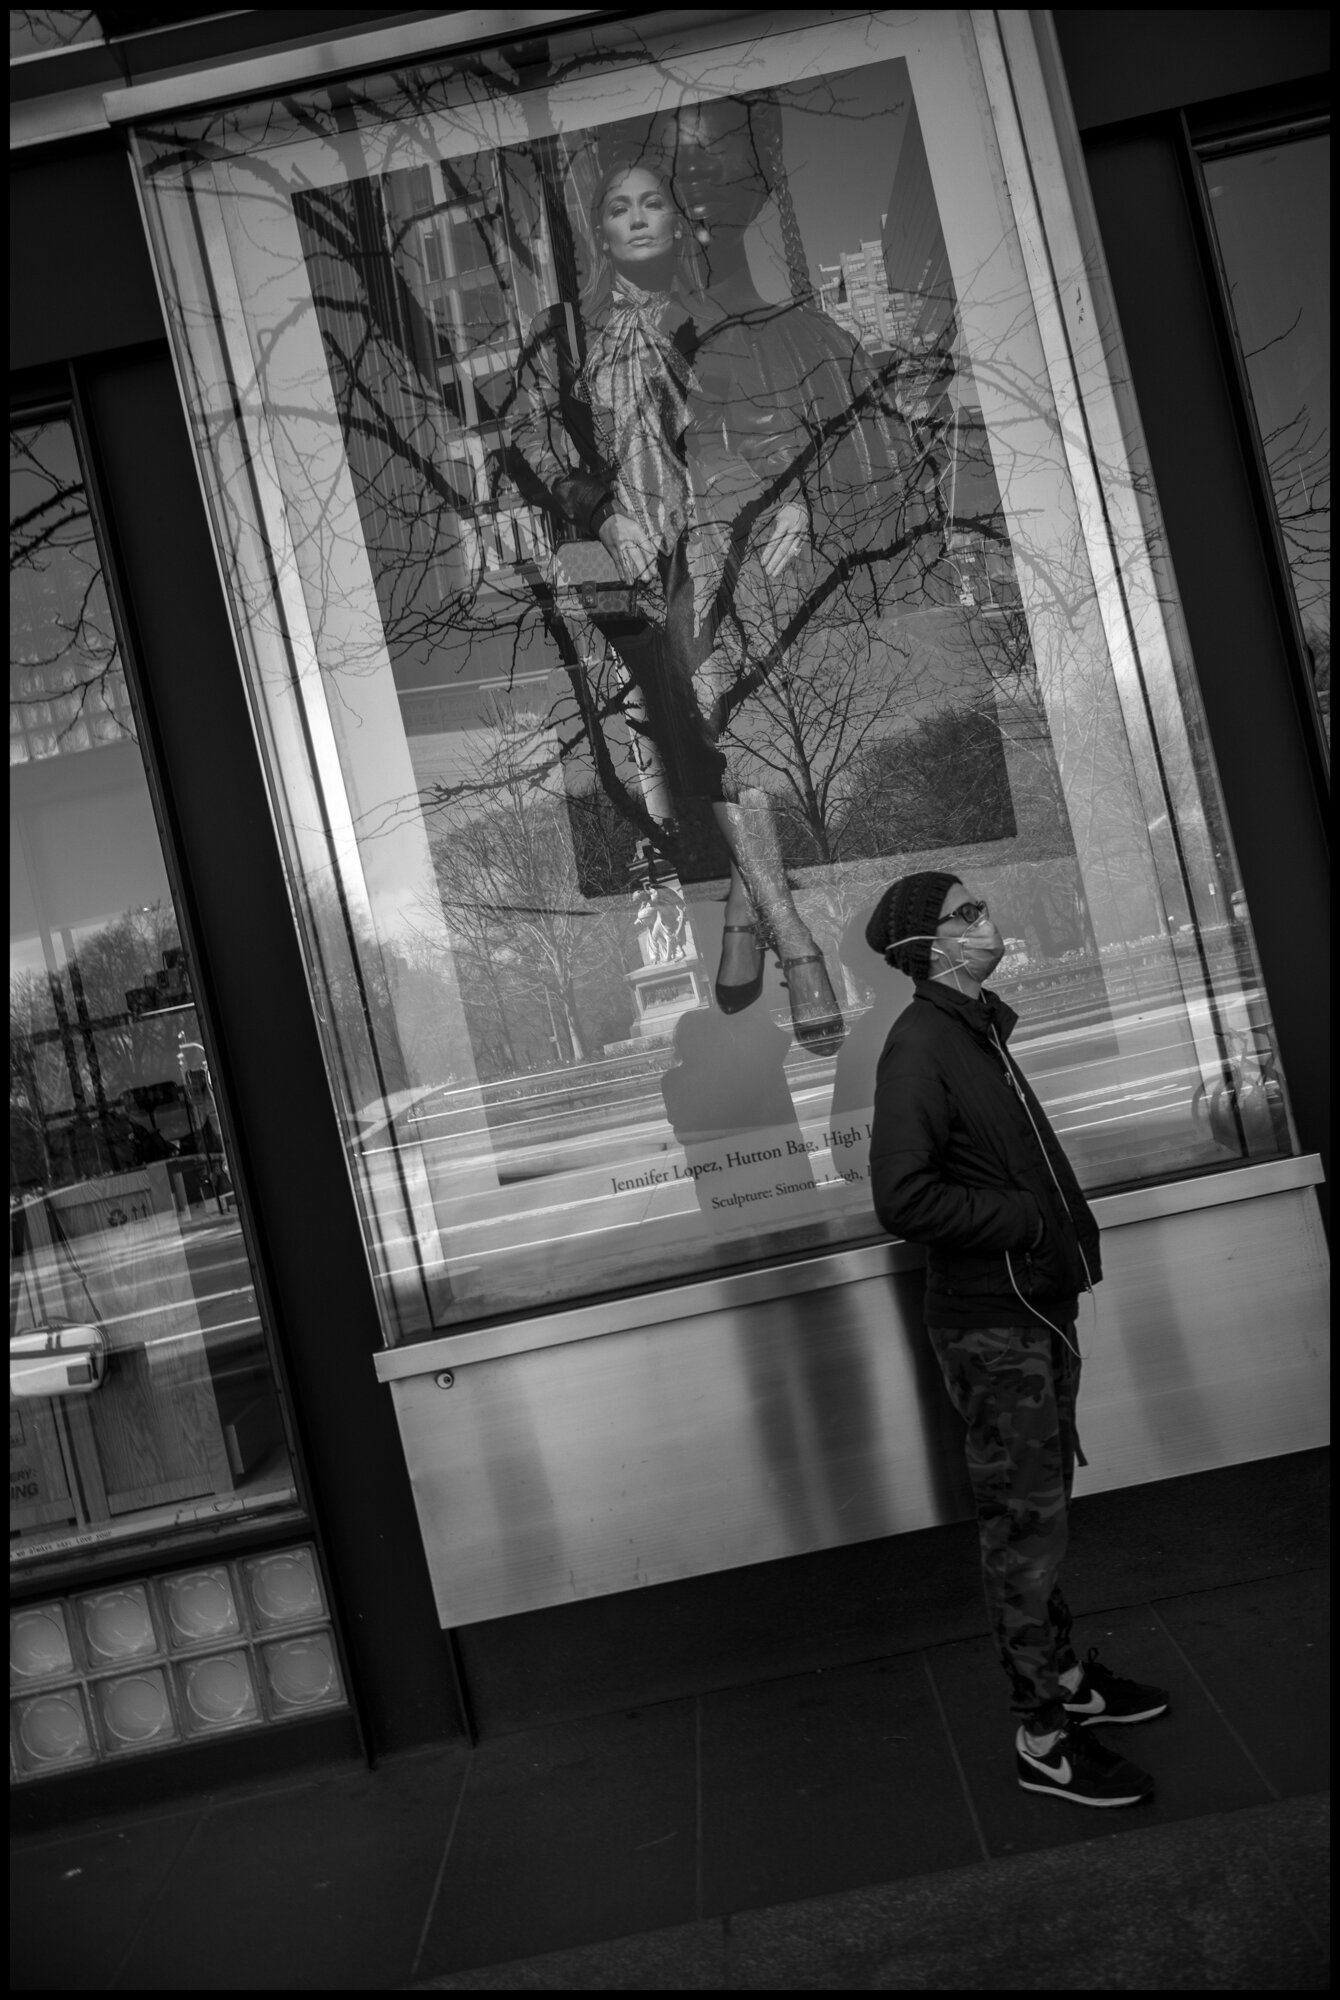  A man keeping social distance in line to enter the shopping mall at Columbus Circle.  March 21, 2020. © Peter Turnley.  ID# 01-013 